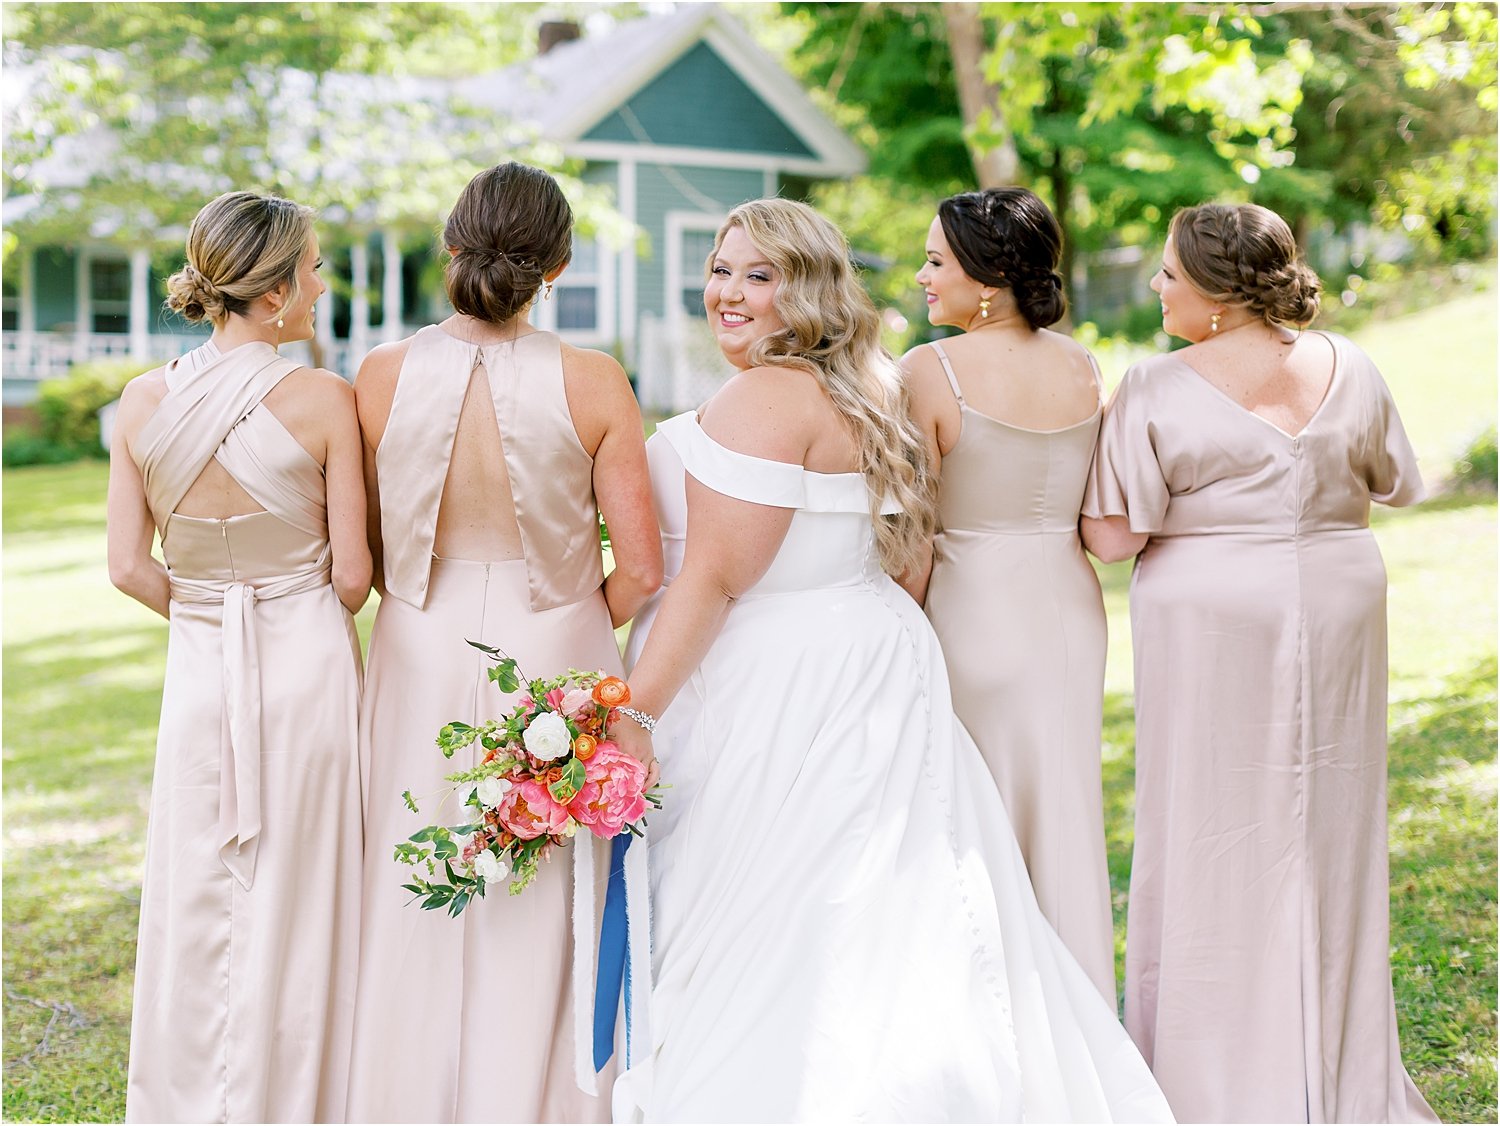 Southern elegance different style bridesmaid dresses